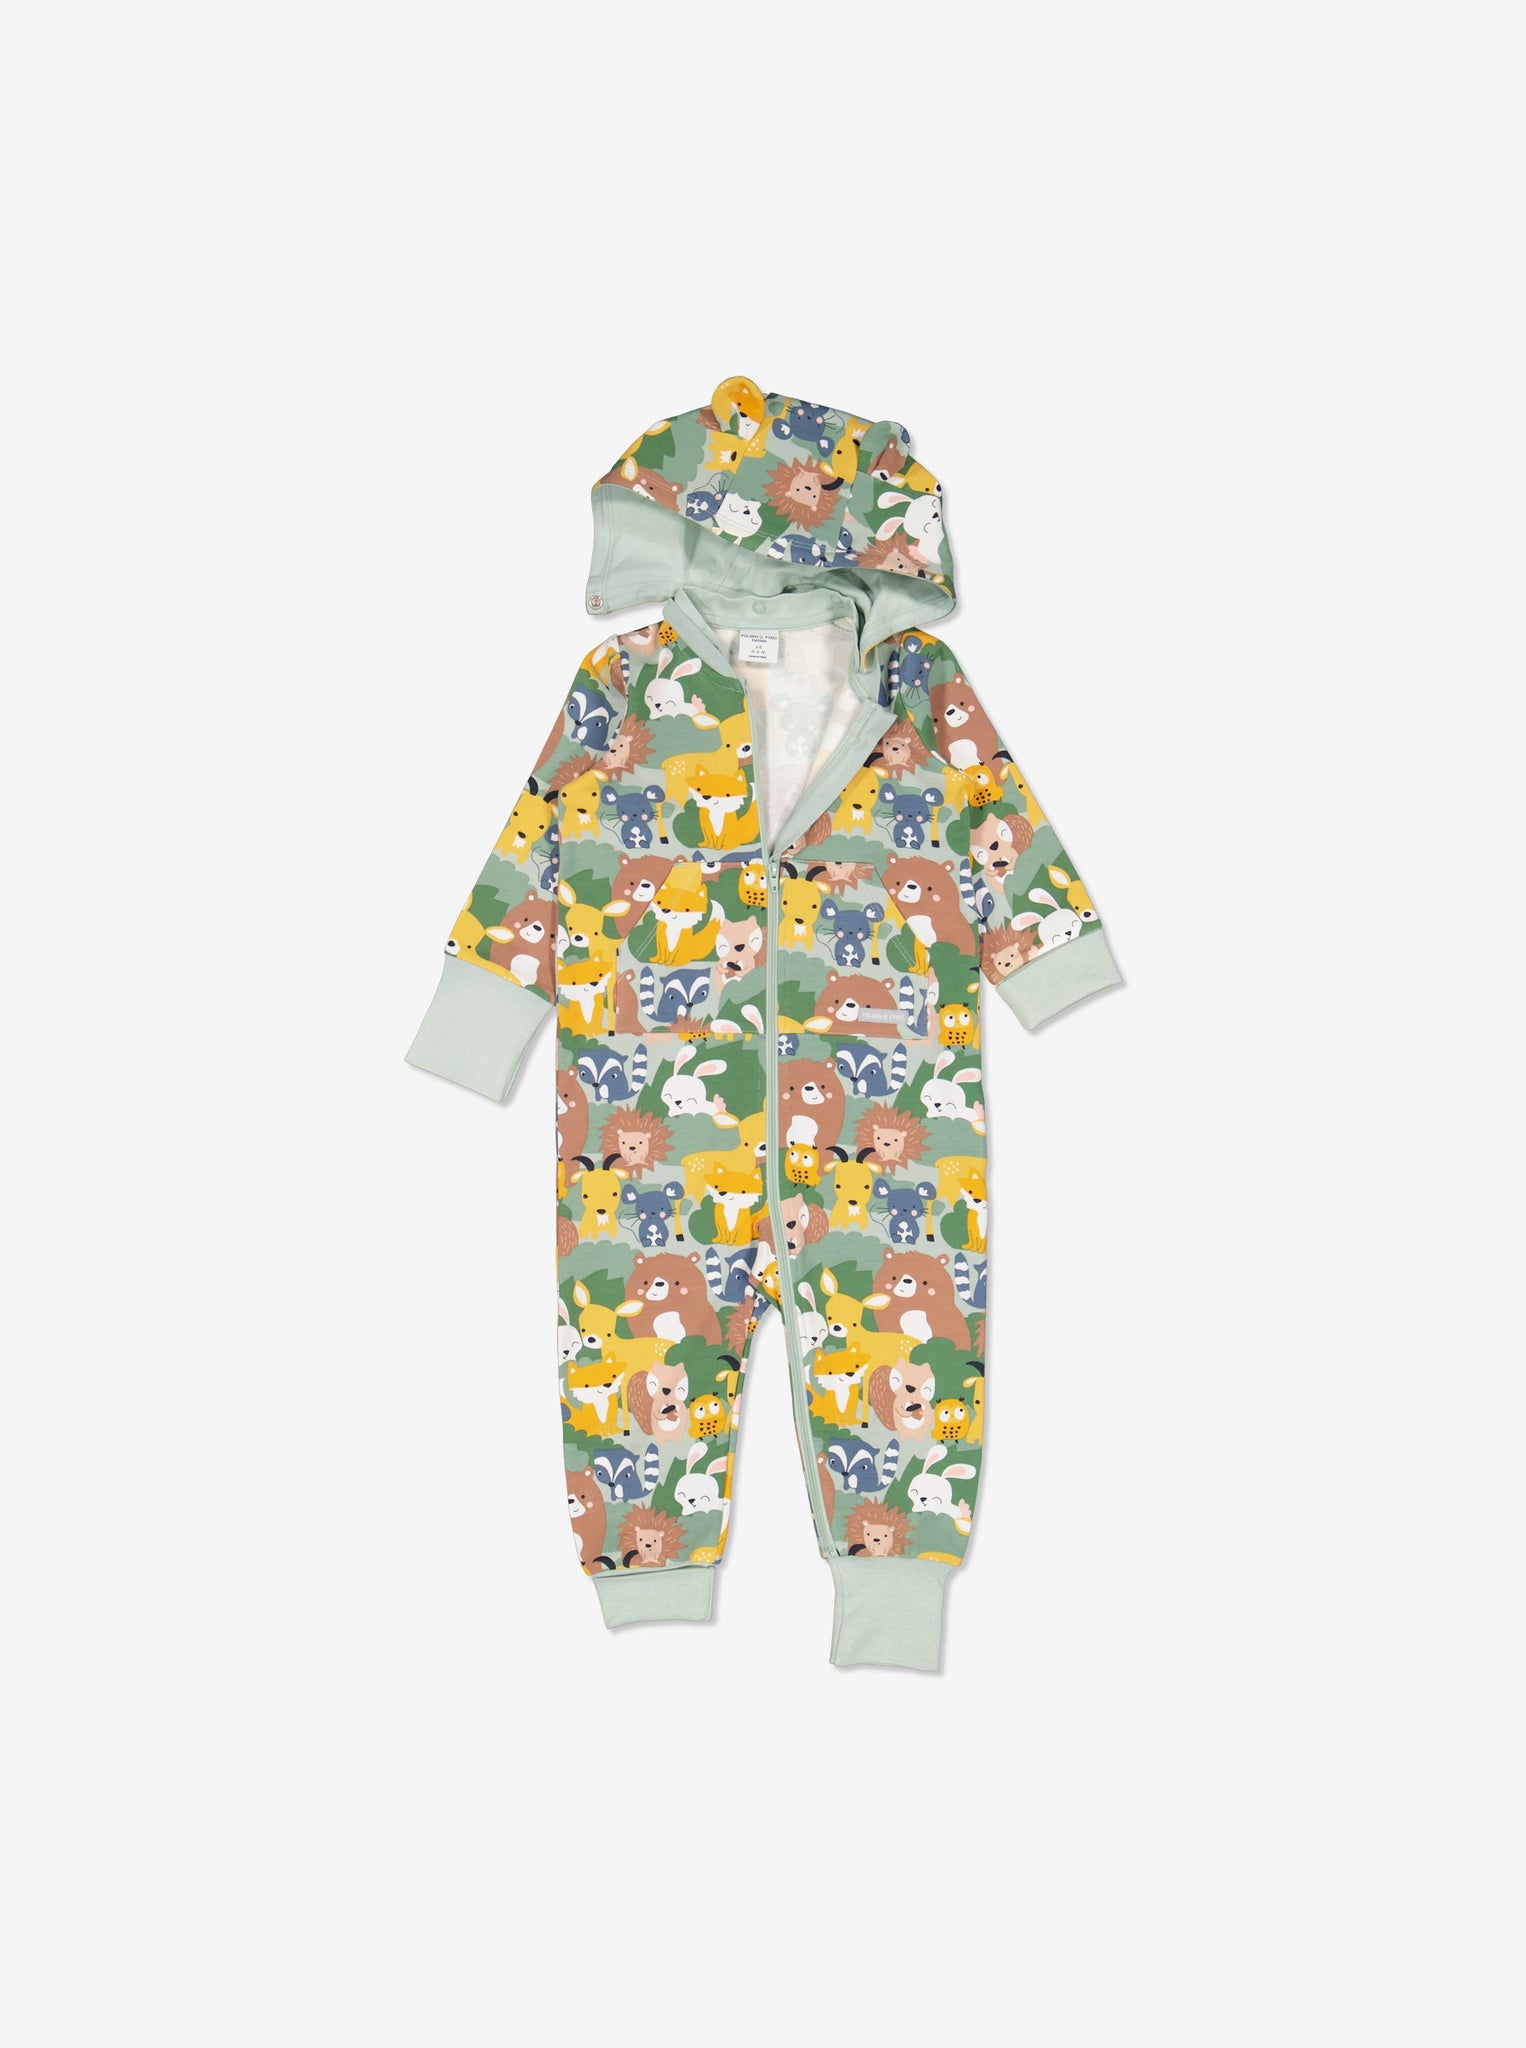  Nordic Animal Newborn All In One from Polarn O. Pyret Kidswear. Made Using GOTS Certified Organic Cotton